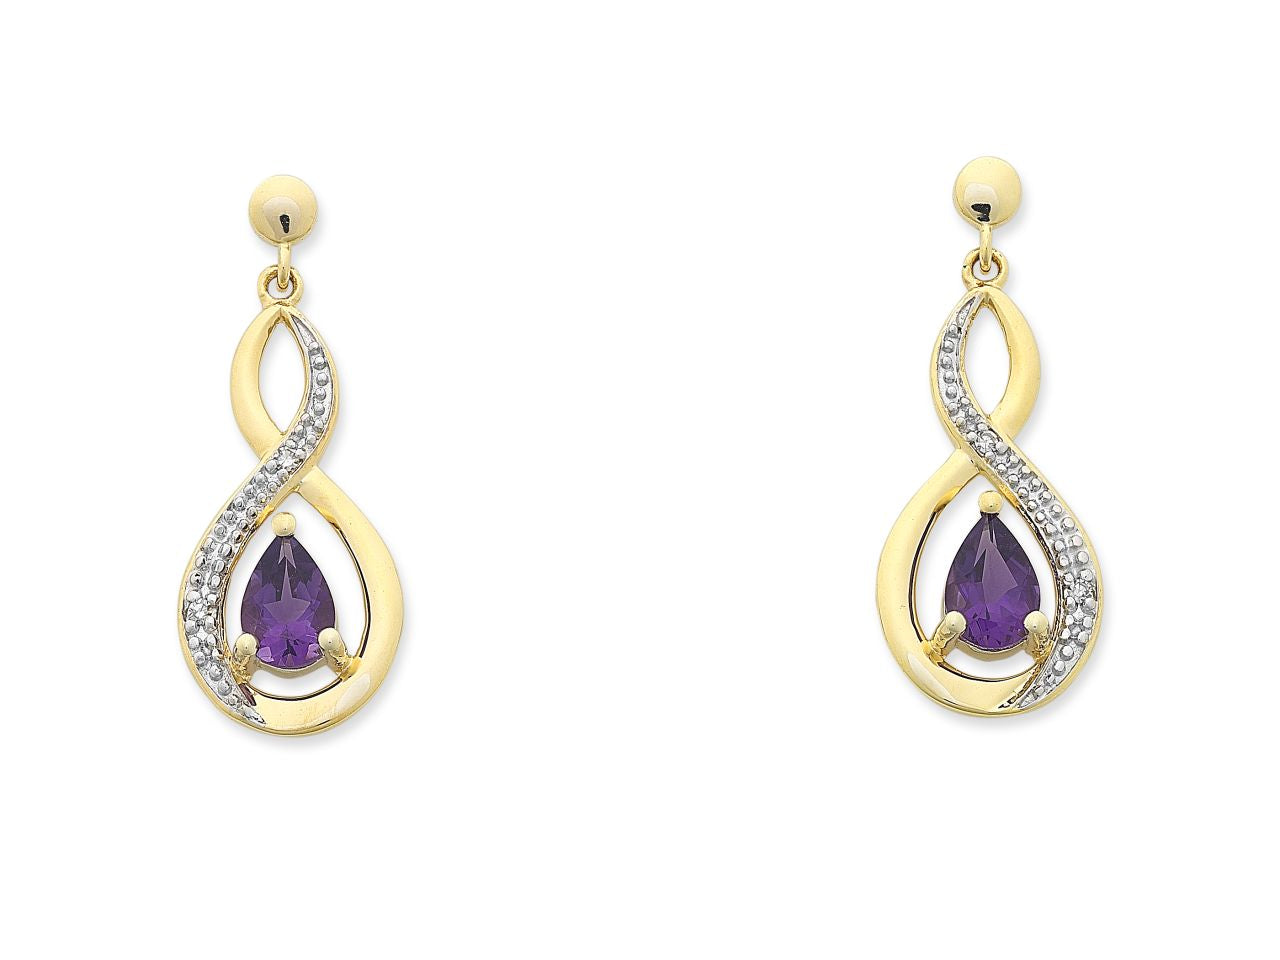 Yellow Gold Cross Over Diamond And Amethyst Drop Earrings